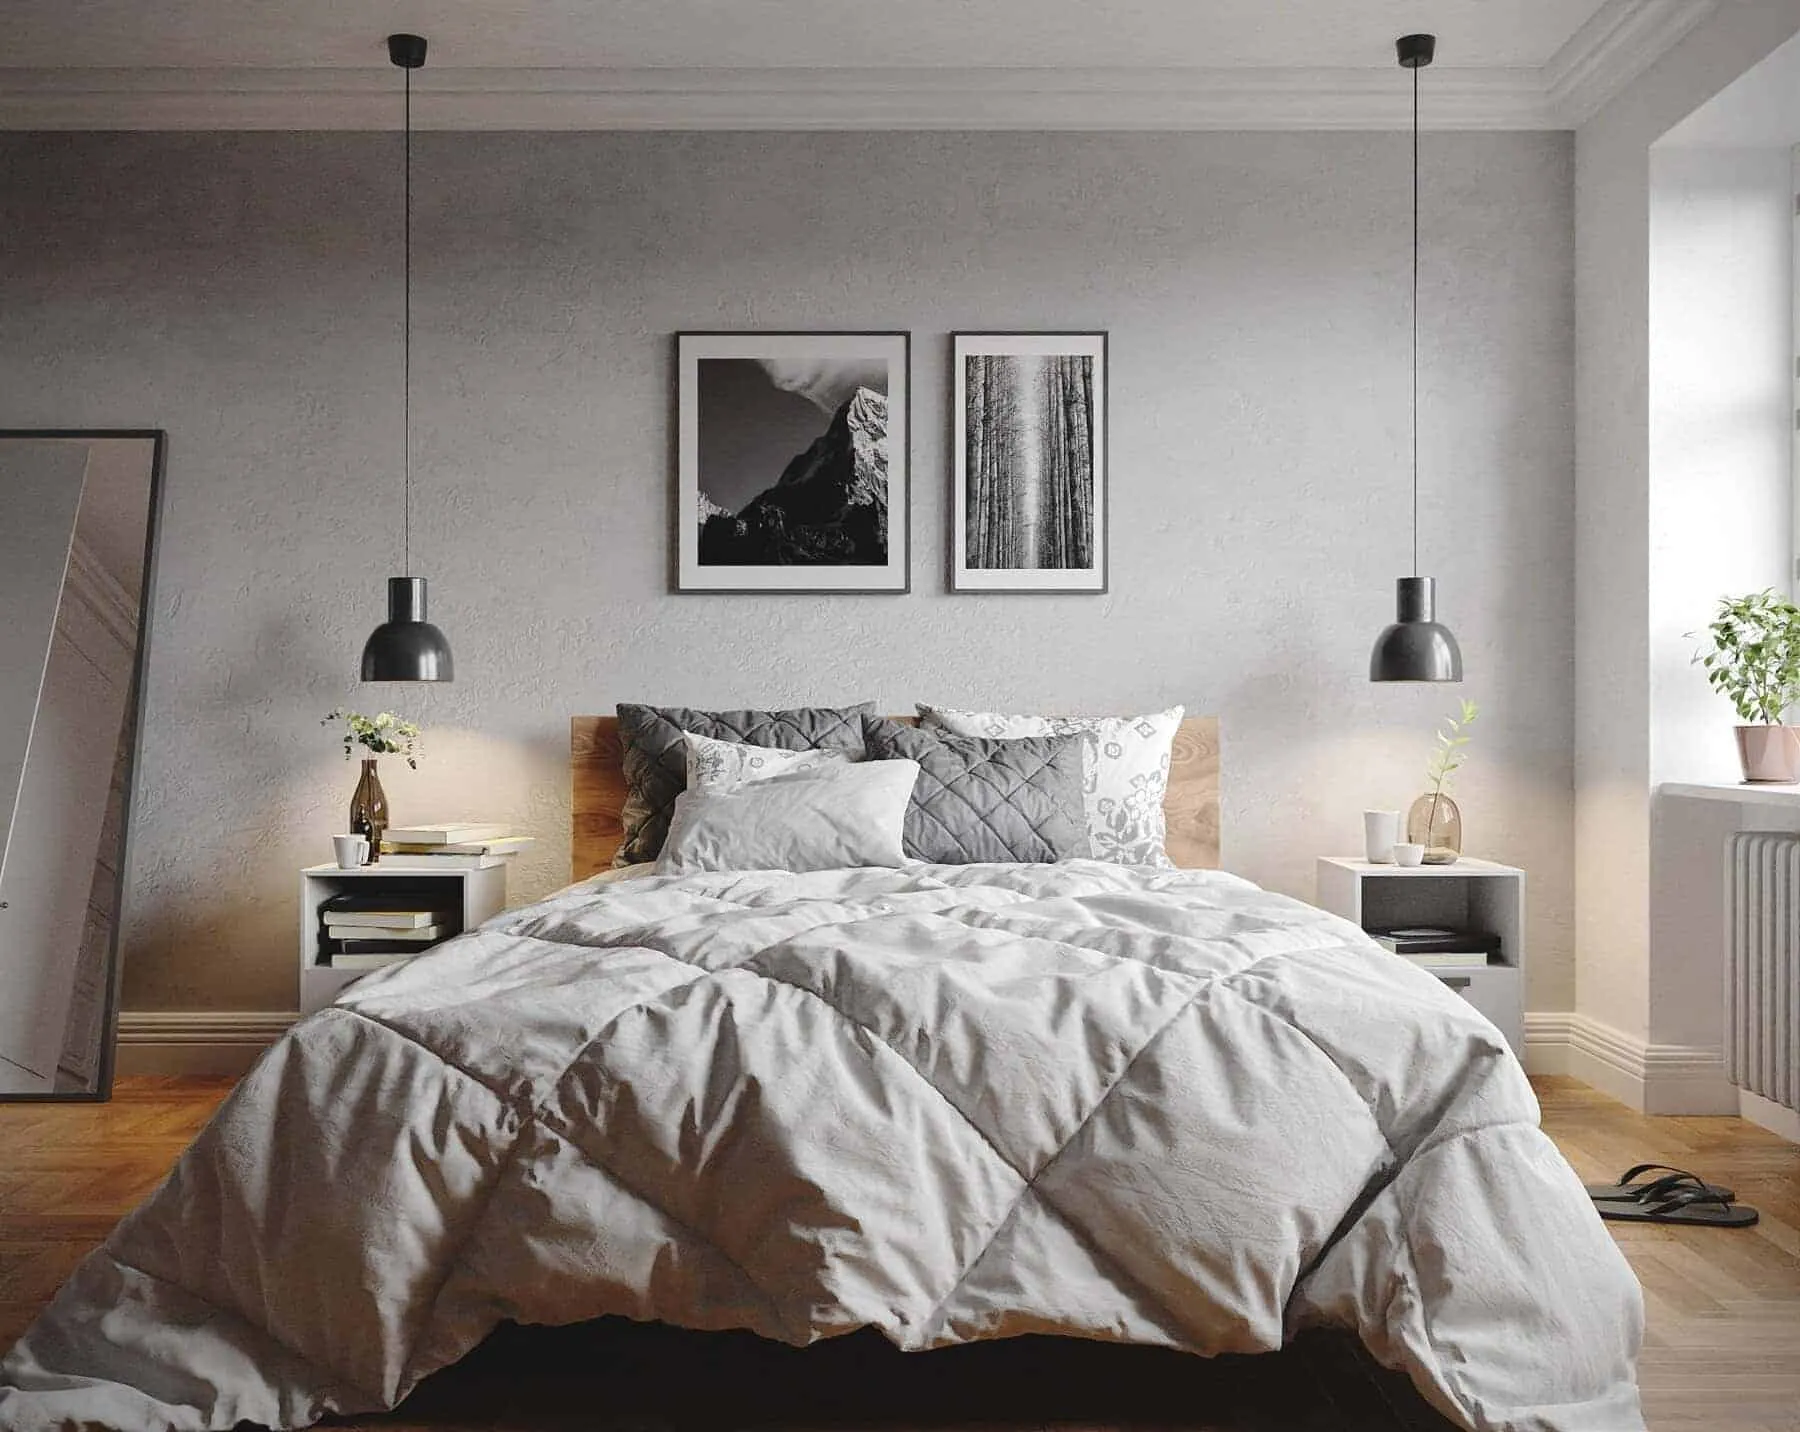 Giving off a strong cocoon like vibe, this bedroom is ideal for compact spaces